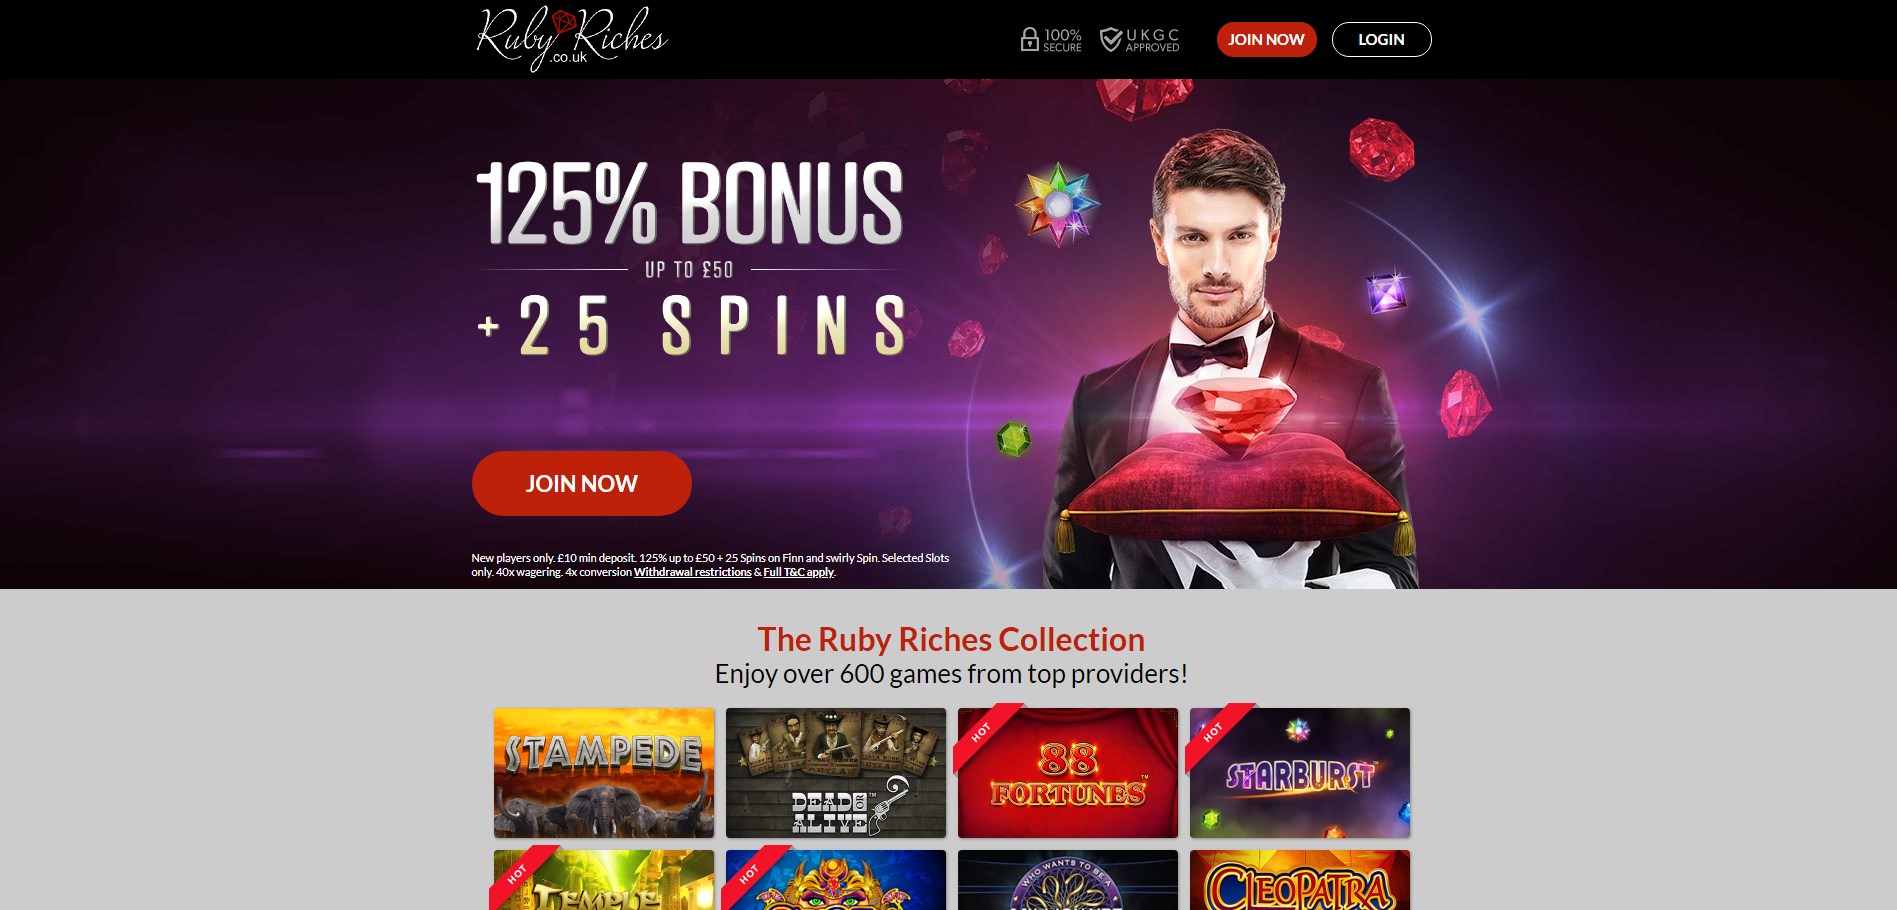 Ruby Riches Casino Review